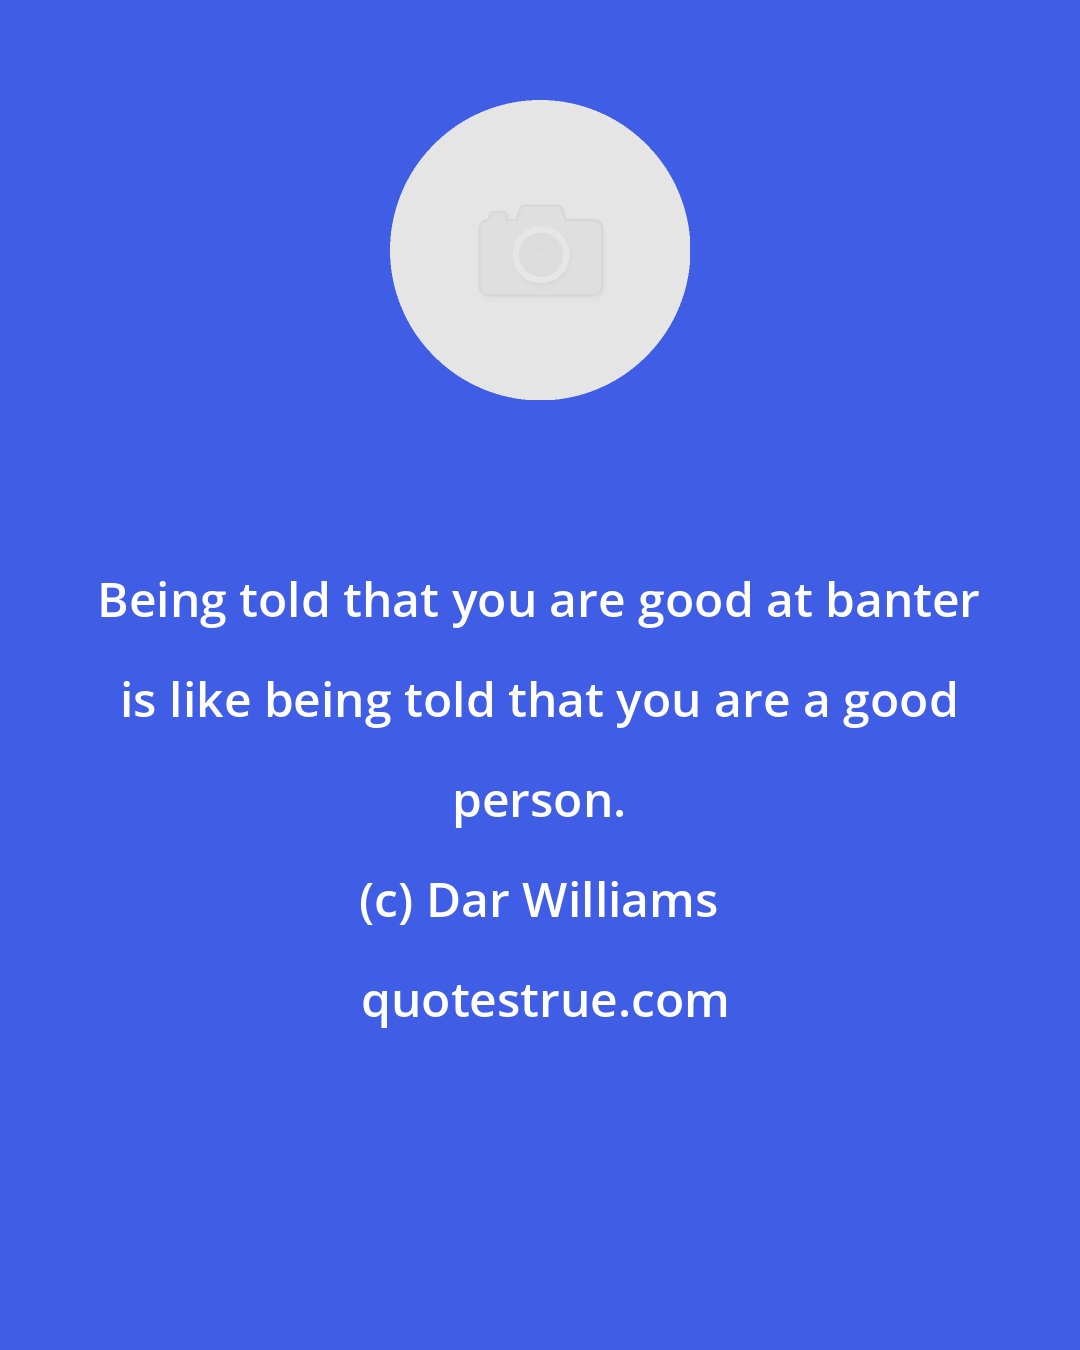 Dar Williams: Being told that you are good at banter is like being told that you are a good person.